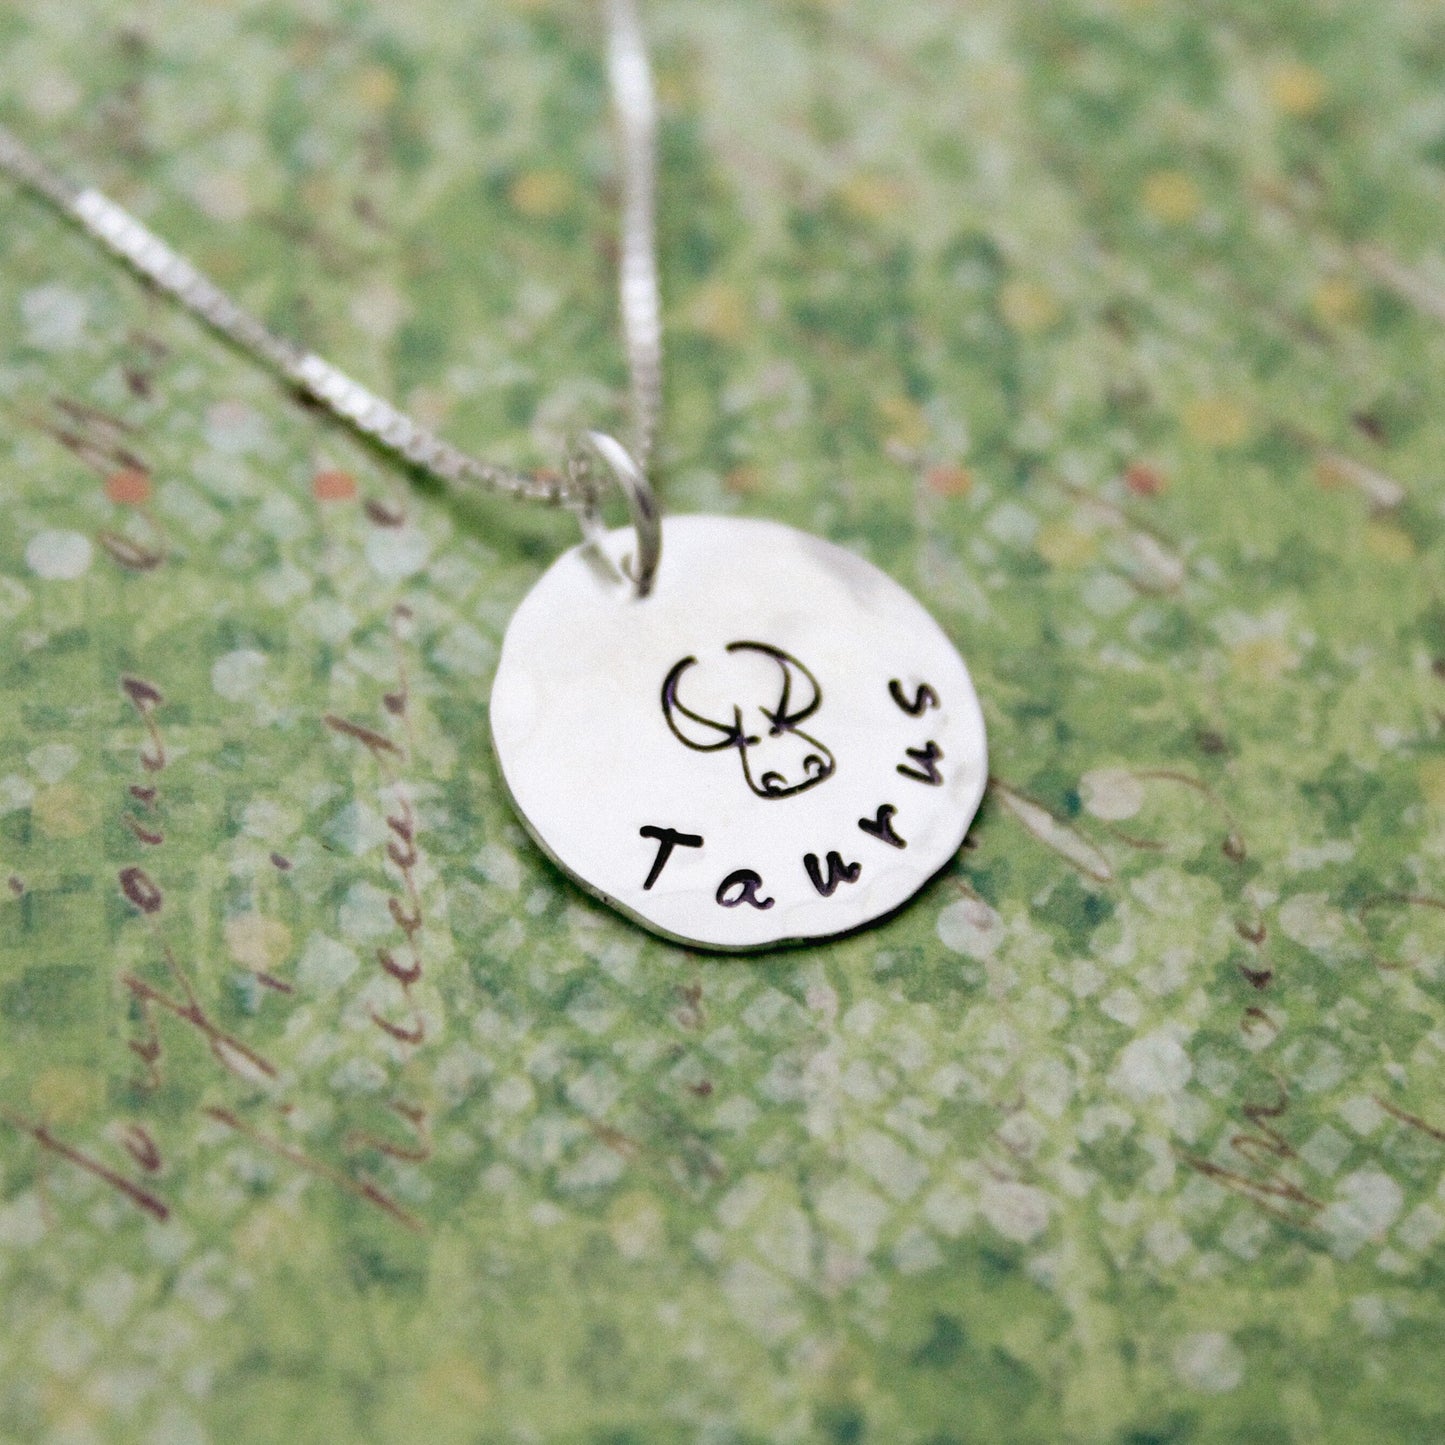 Taurus Zodiac Necklace, Sterling Silver Taurus Zodiac Necklace, Cute Boho Gift, Taurus Birthday Jewelry, Zodiac Sign Birthday Gift for Her